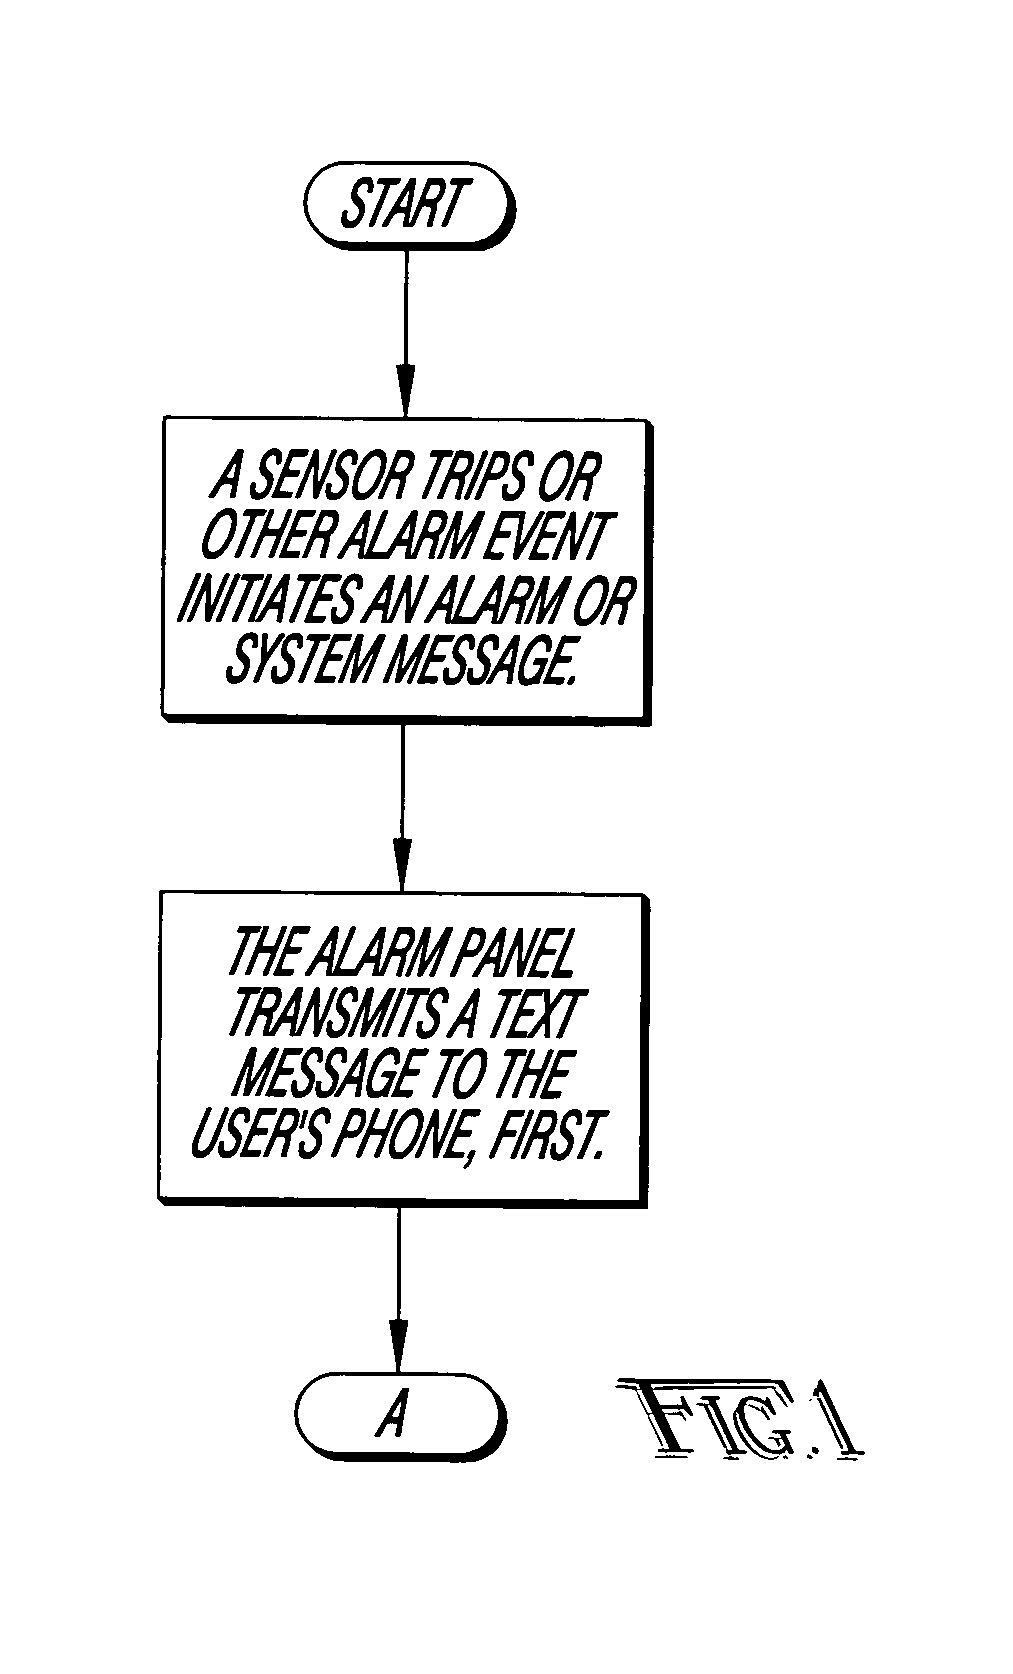 Method for remote pre-verification of alarm signals and remote alarm system control